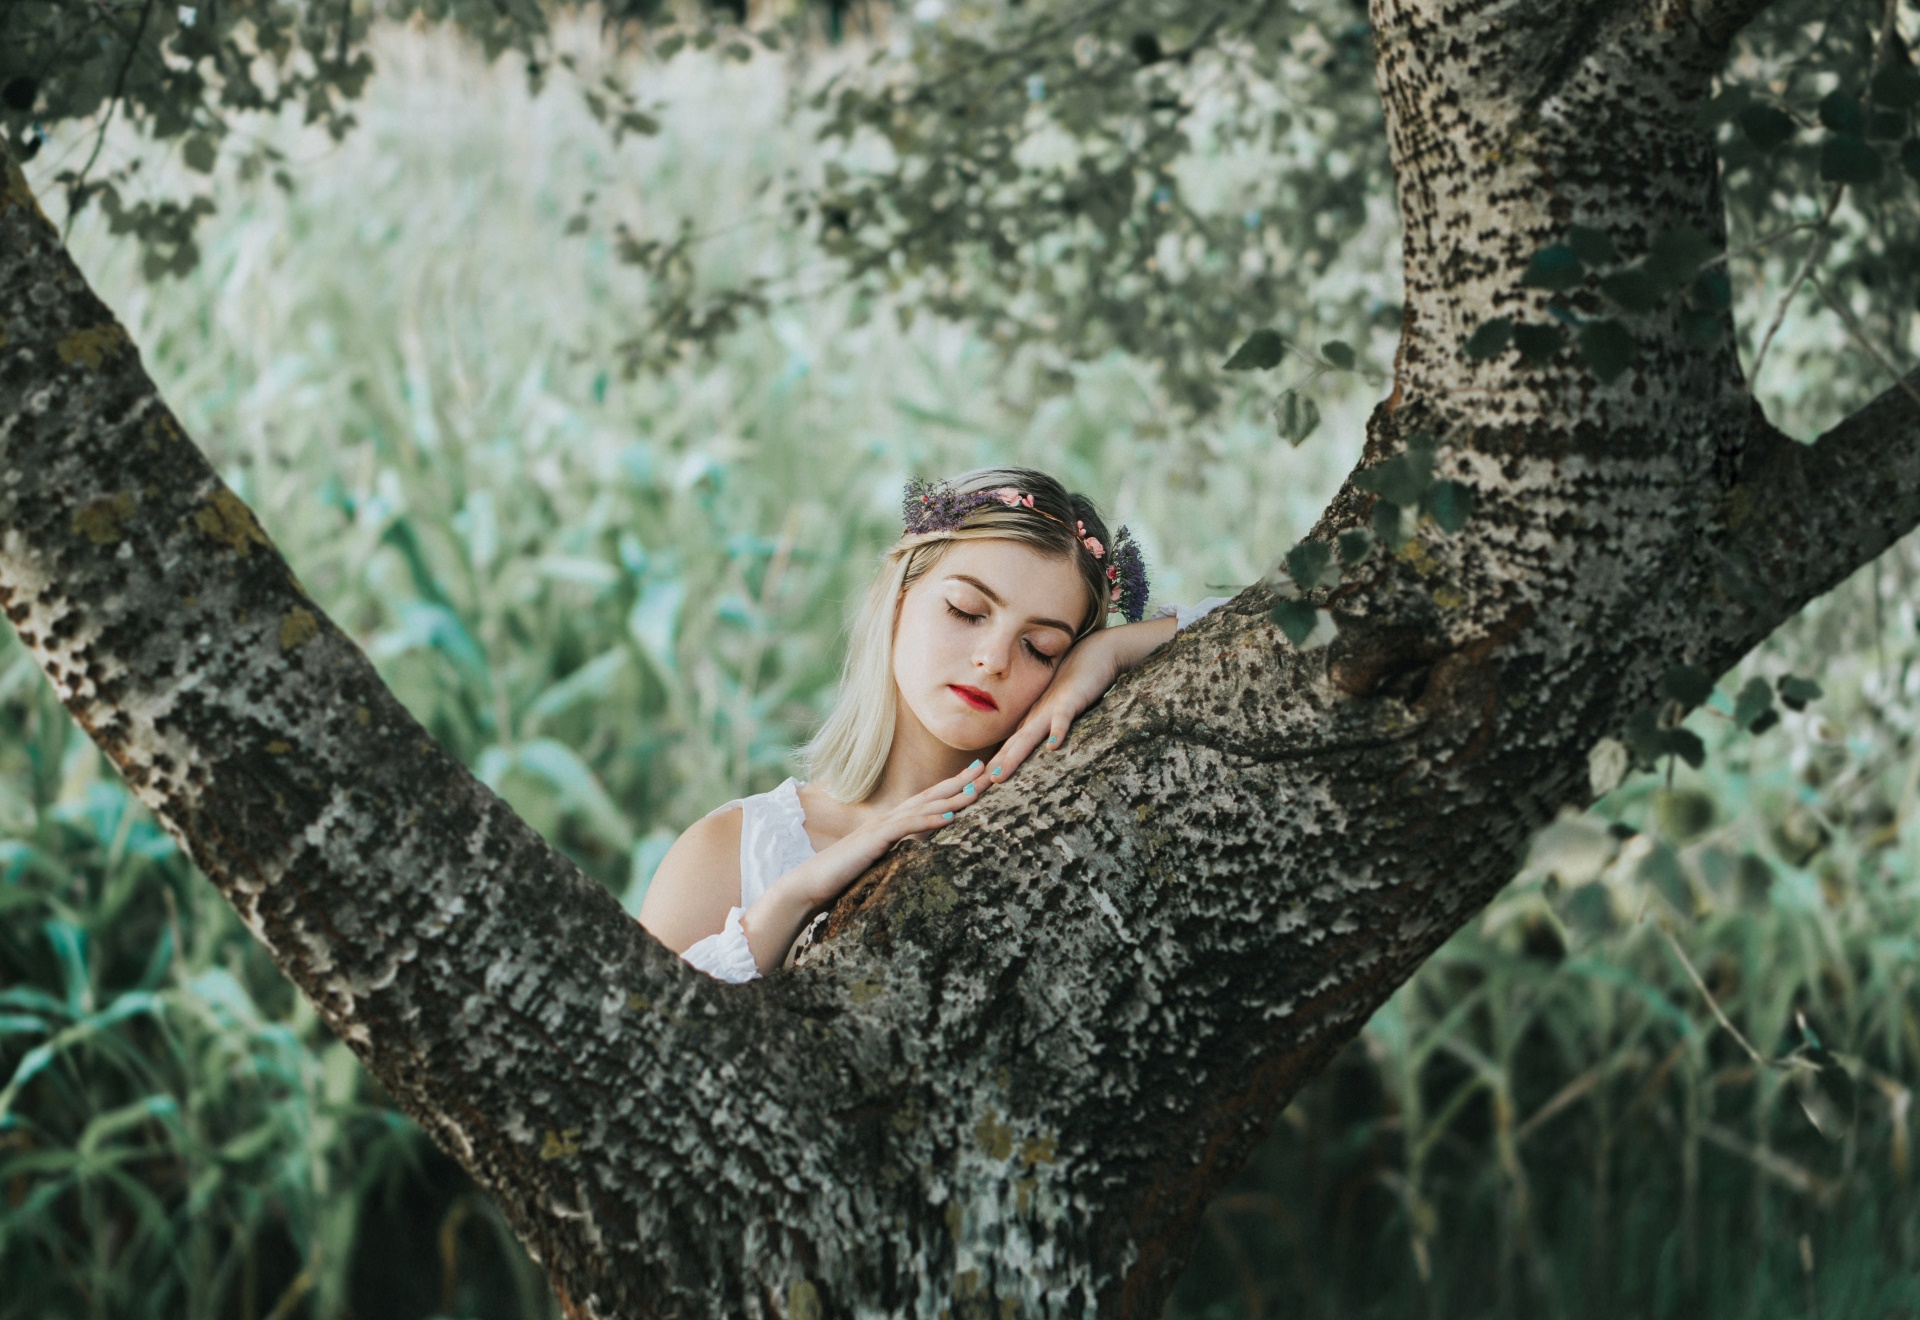 People 1920x1320 nature trees women outdoors women closed eyes red lipstick